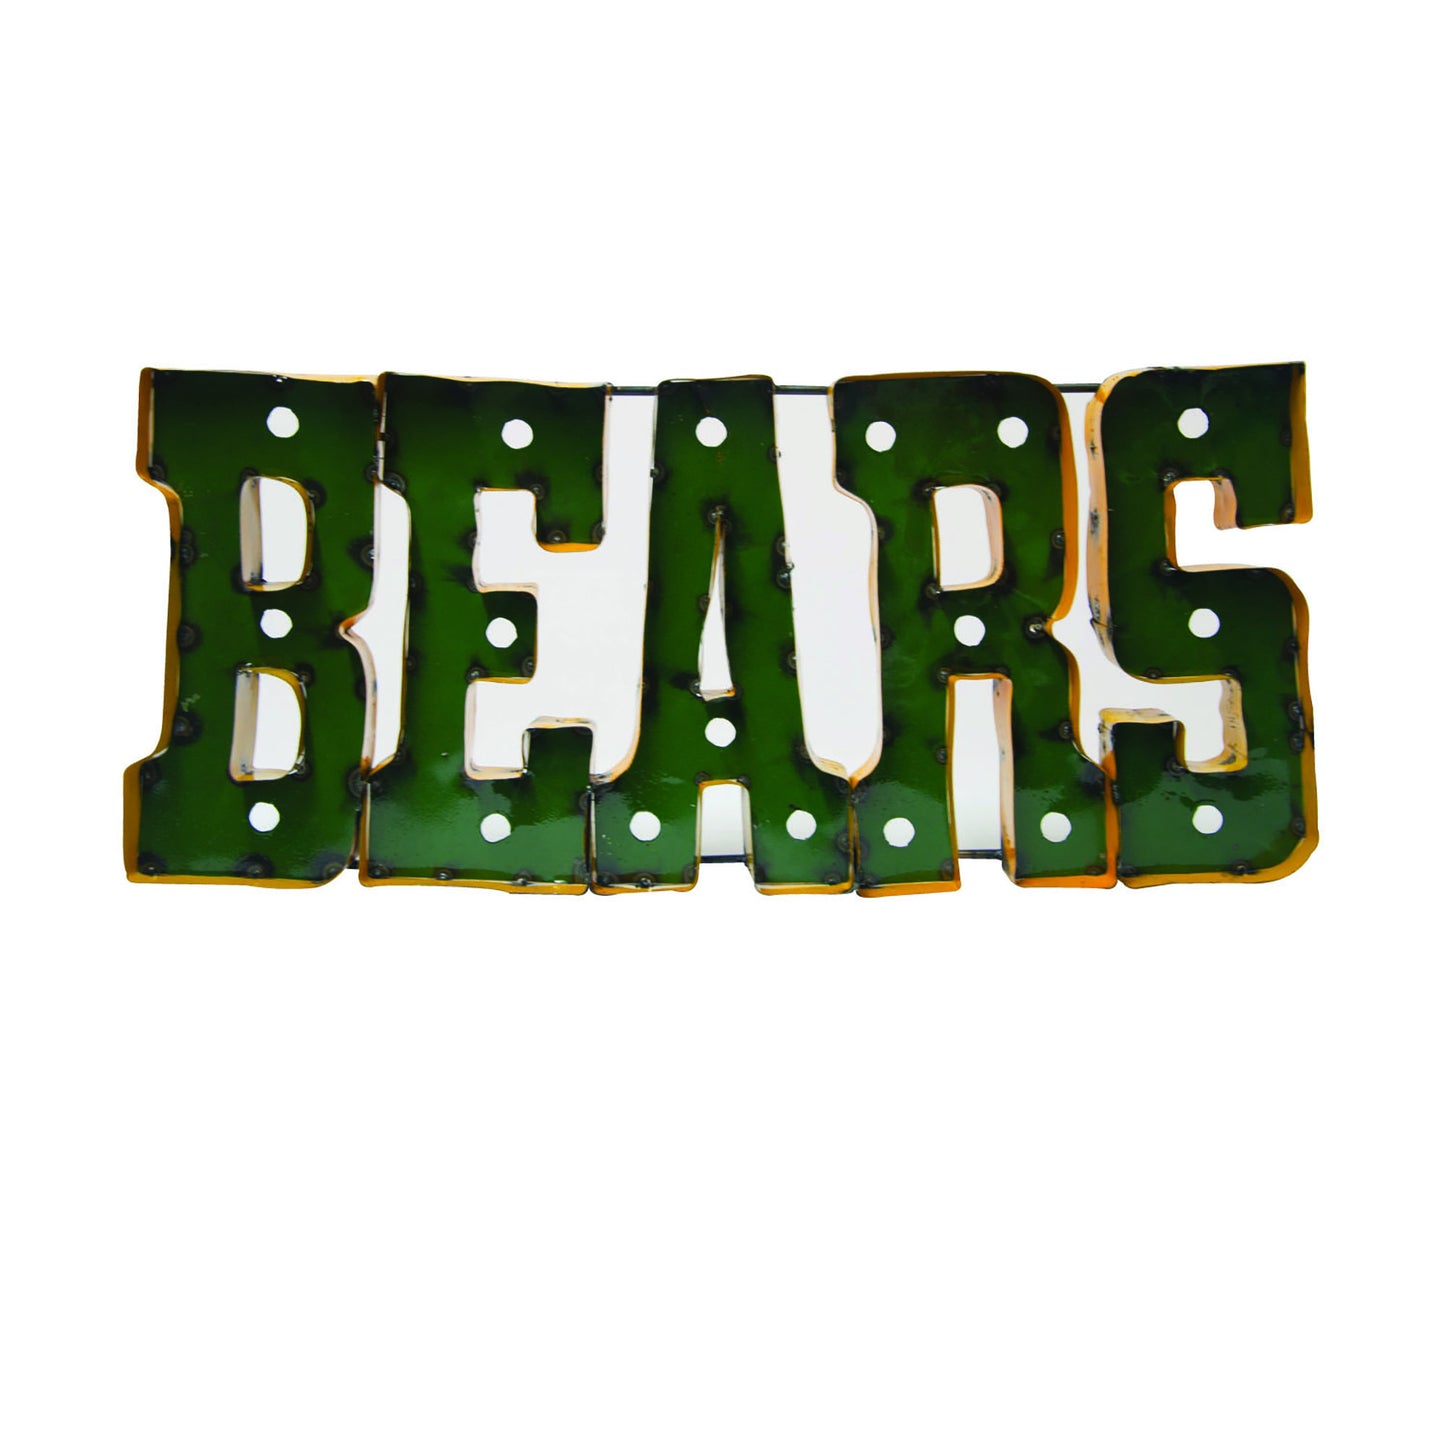 Baylor University "Bears" Lighted Recycled Metal Wall Decor